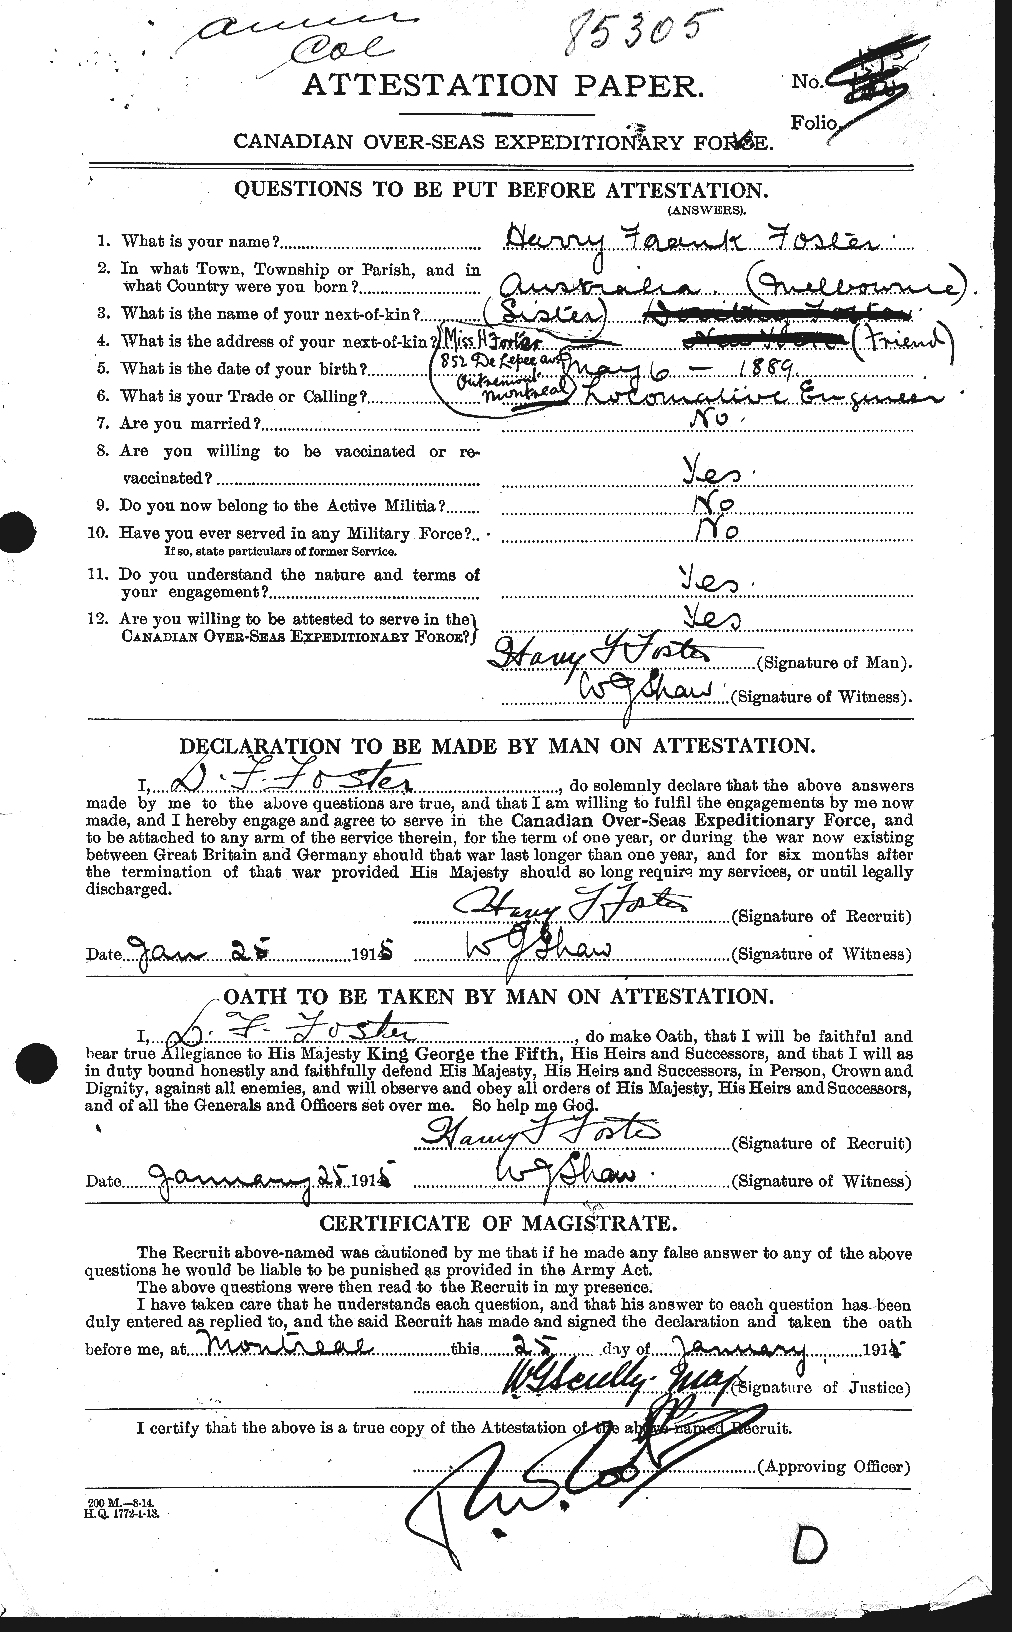 Personnel Records of the First World War - CEF 330749a